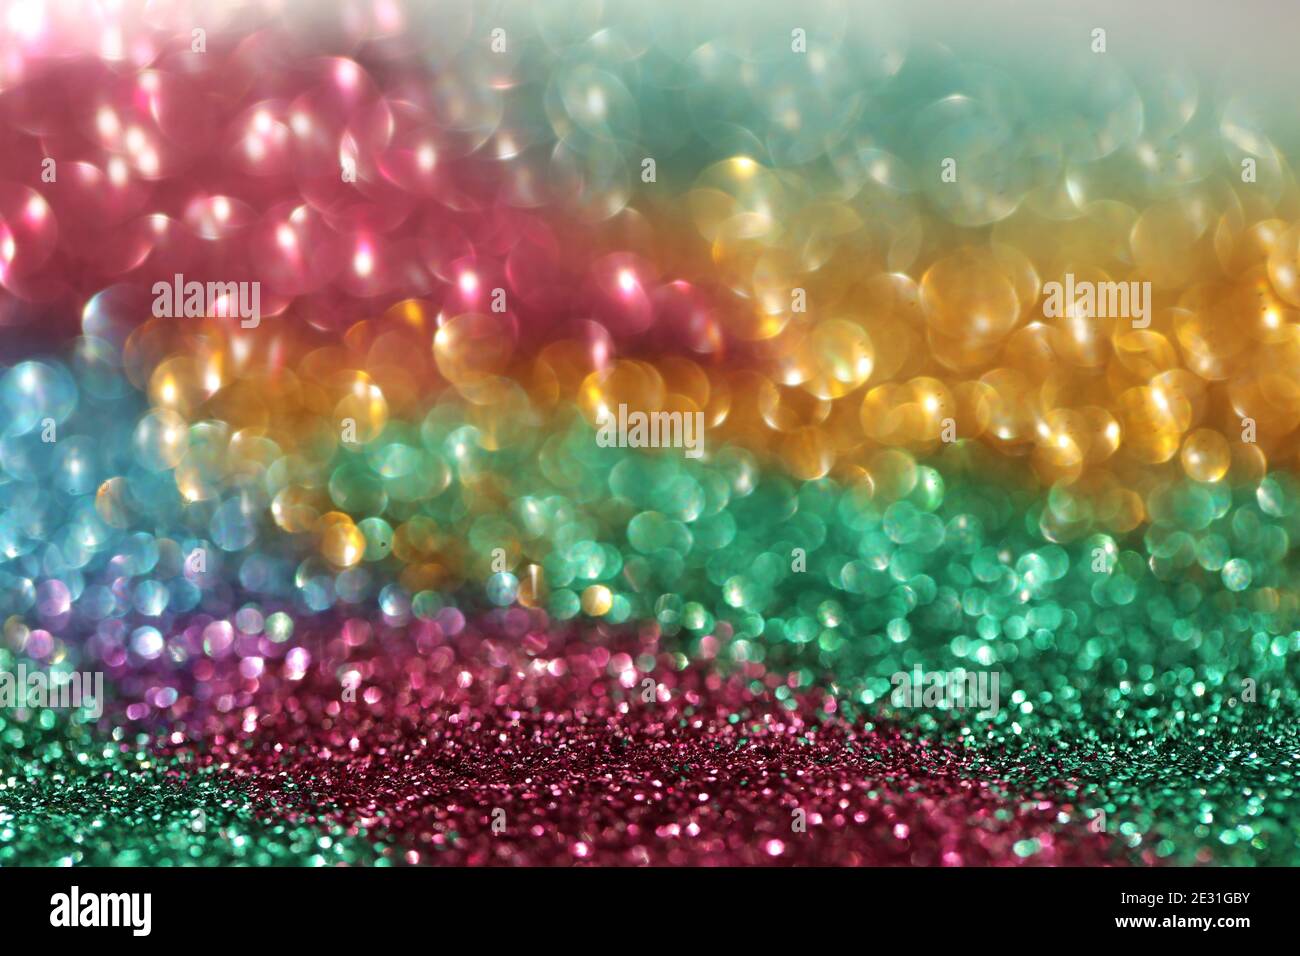 Wallpaper phone shining glitter.Glitter radiance surface. multicolored variegated glitter with shining bokeh.Festive background. New Year and Stock Photo